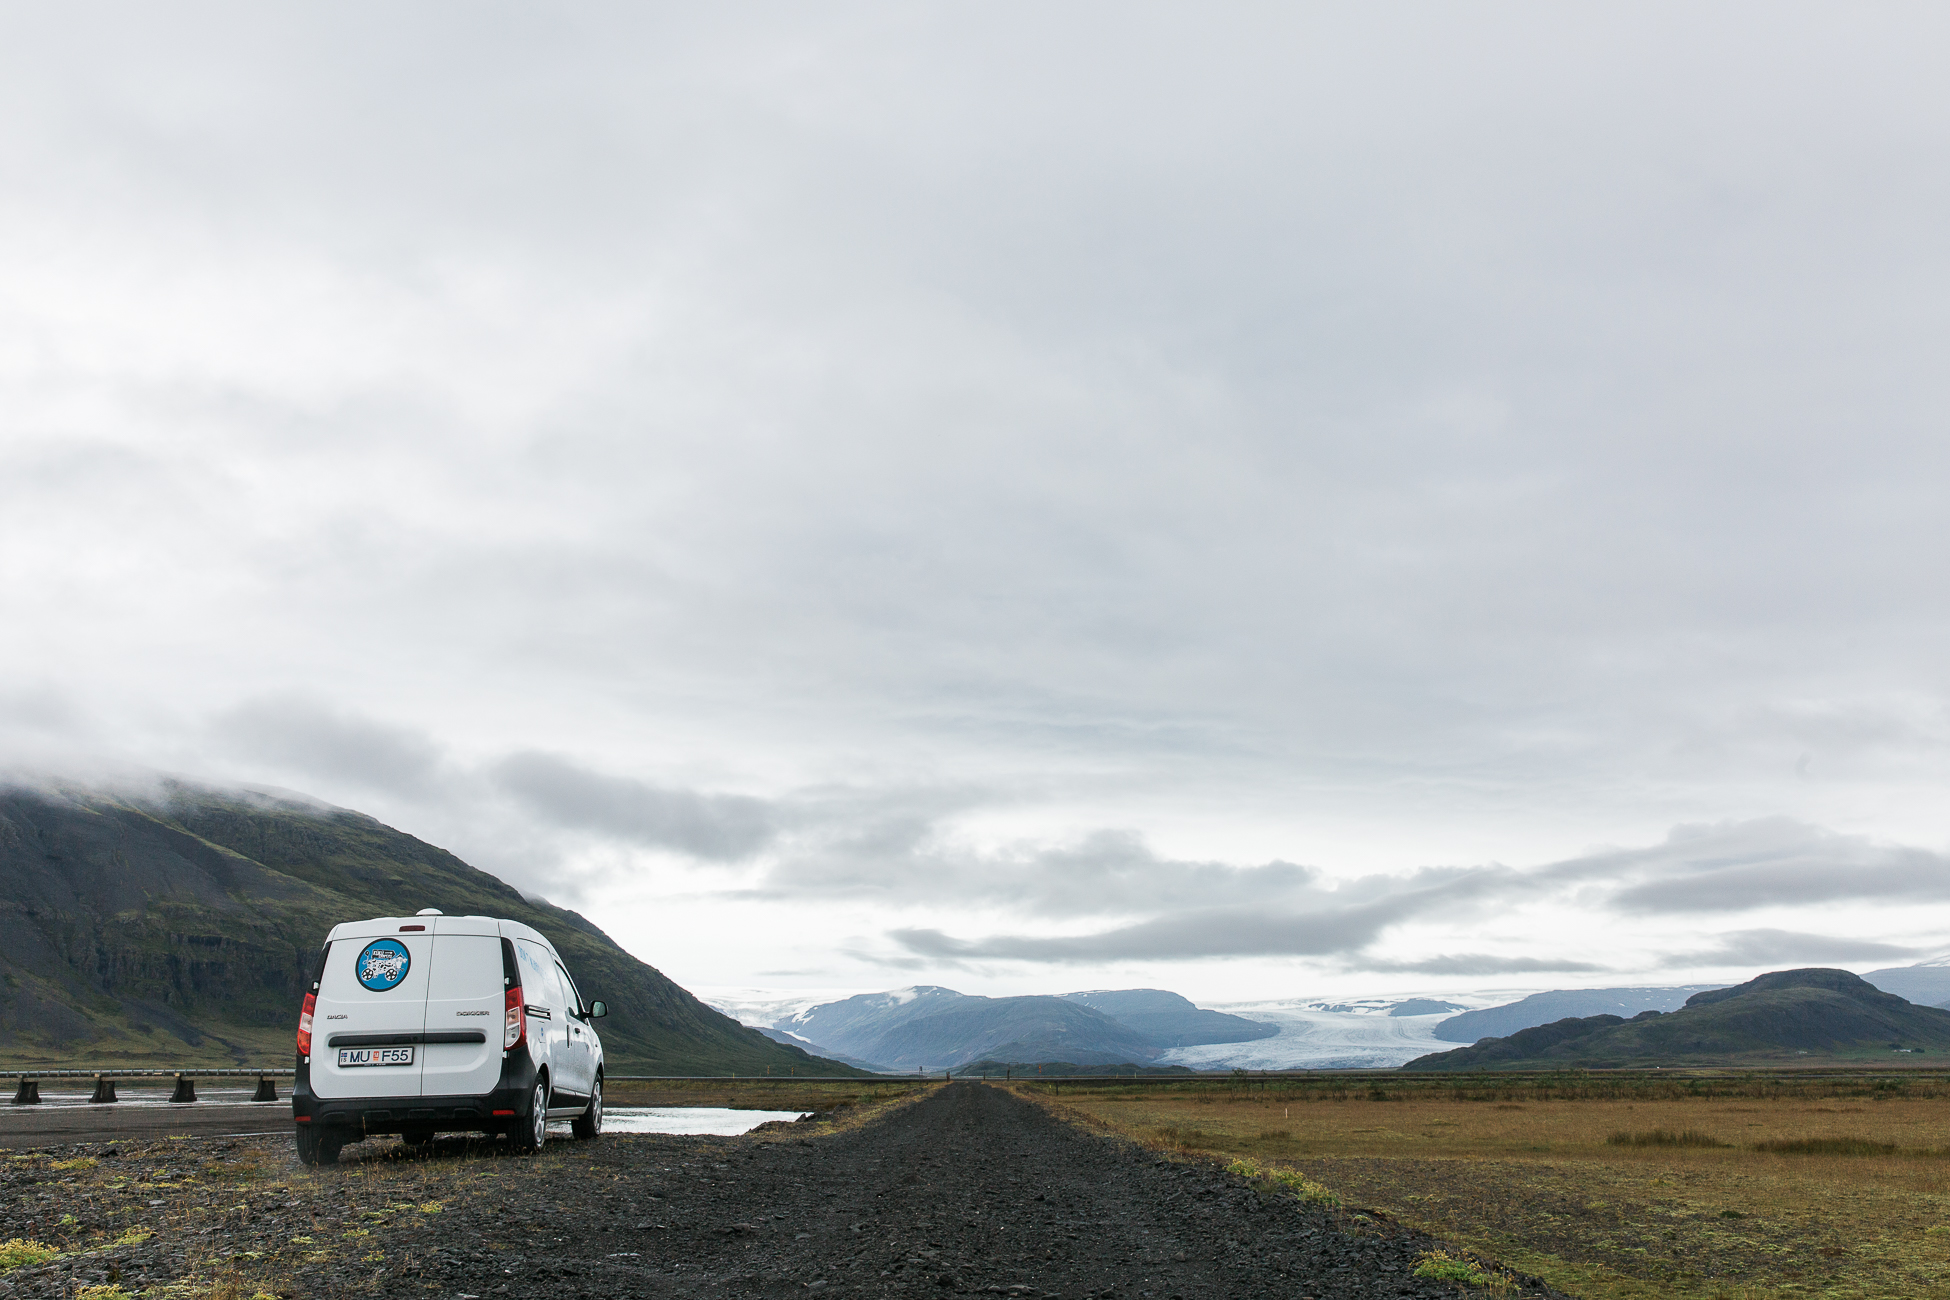 12 days in a Campervan in Iceland / See and Savour